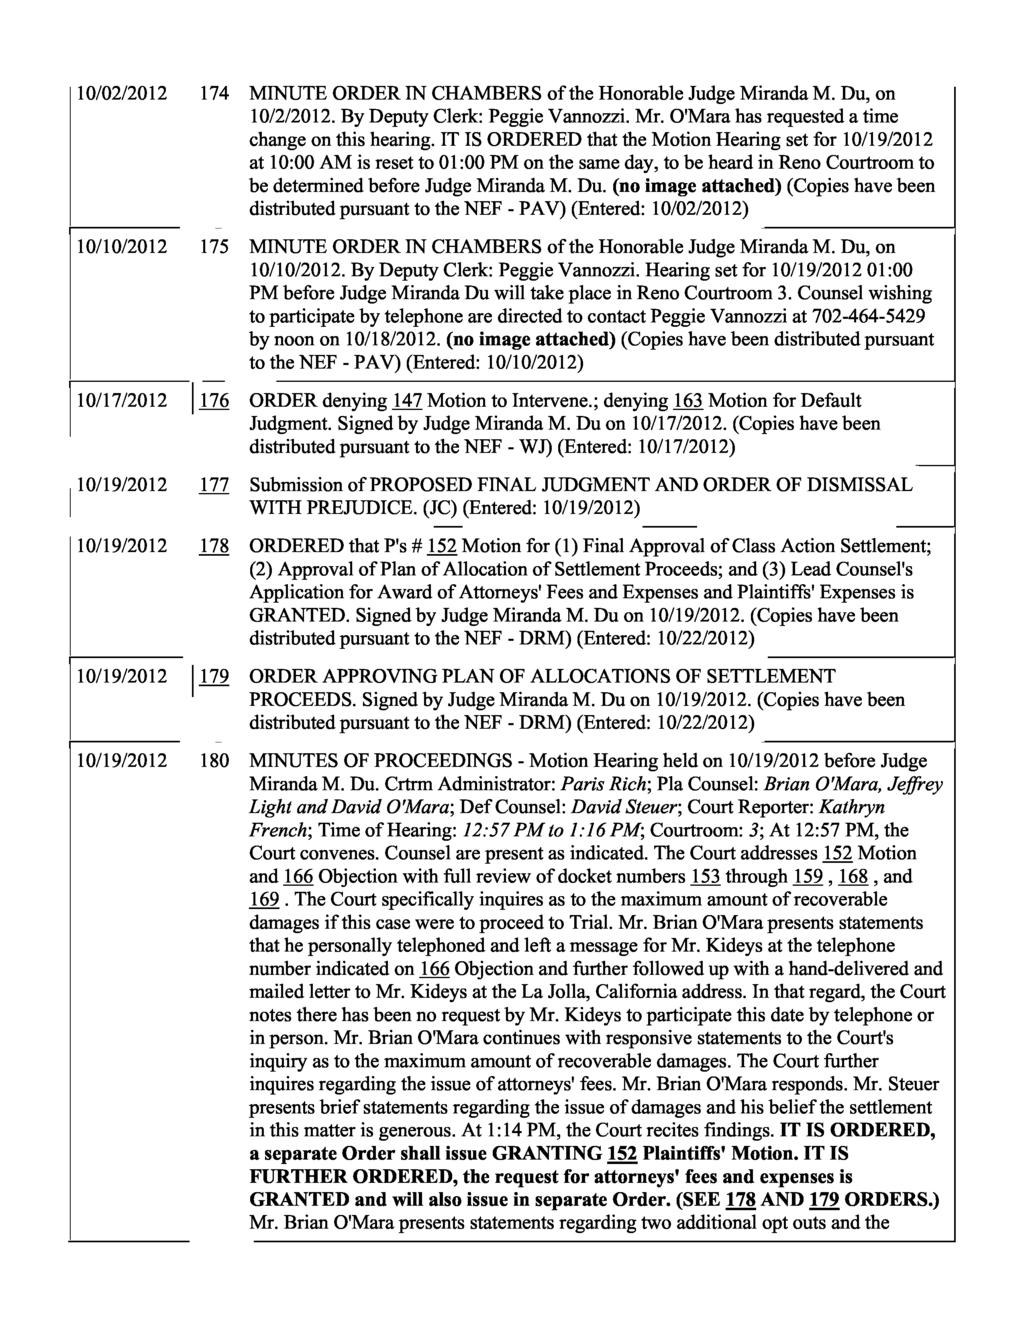 10/02/2012 174 MINUTE ORDER IN CHAMBERS of the Honorable Judge Miranda M. Du, on 10/2/2012. By Deputy Clerk: Peggie Vannozzi. Mr. O'Mara has requested a time change on this hearing.